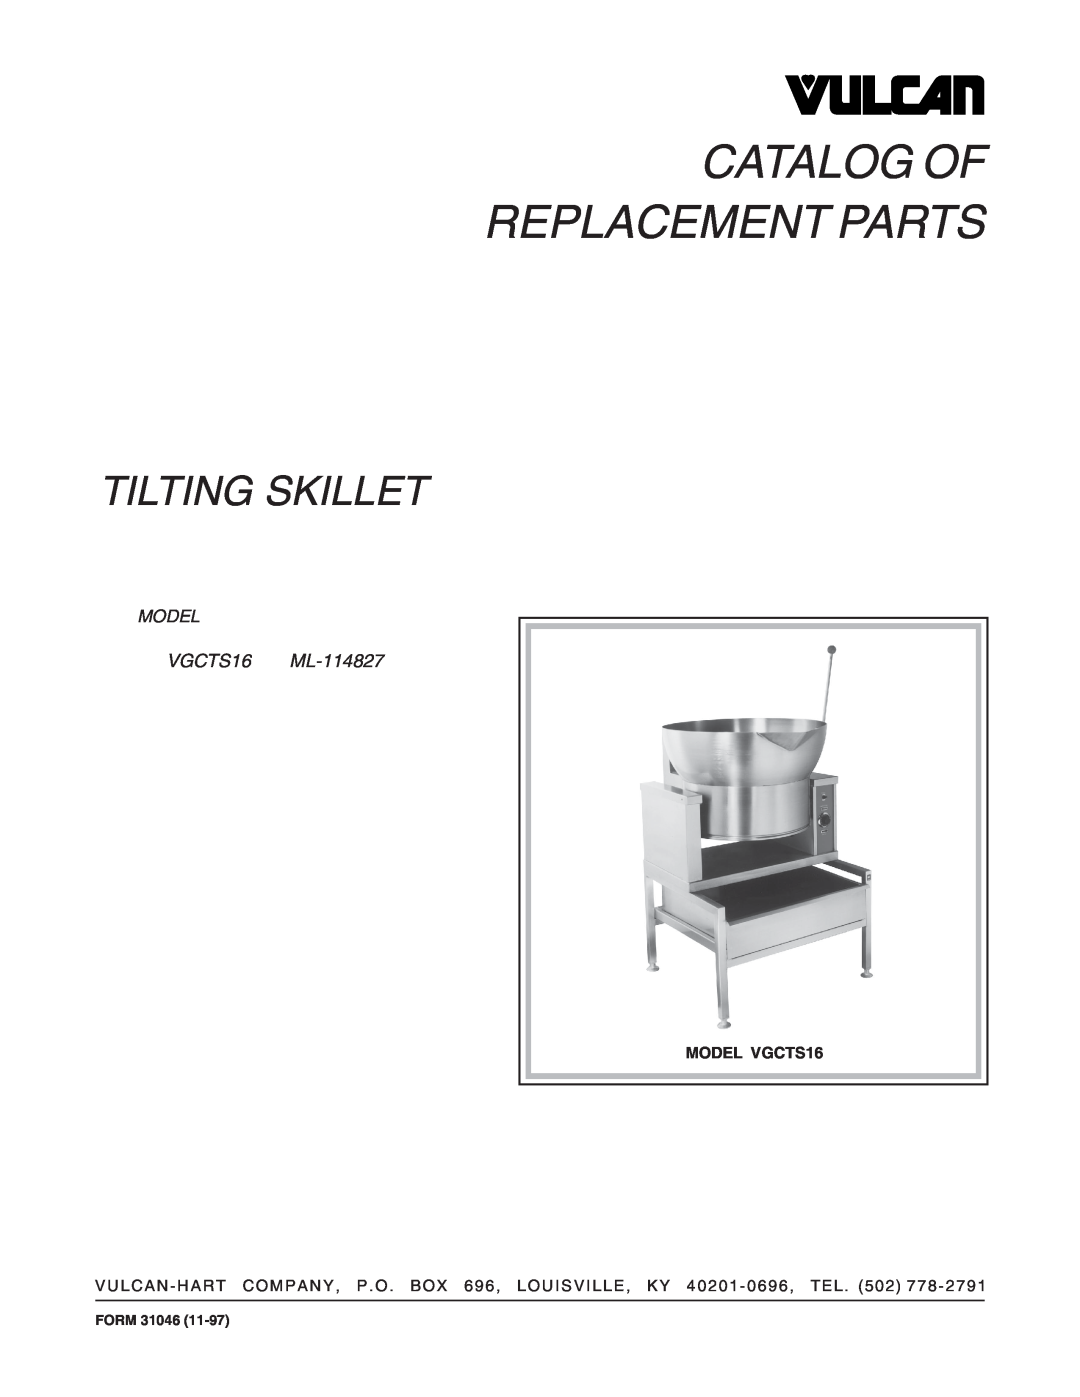 Vulcan-Hart manual Form, Catalog Of Replacement Parts, Tilting Skillet, VGCTS16 ML-114827, Model, MODEL VGCTS16 